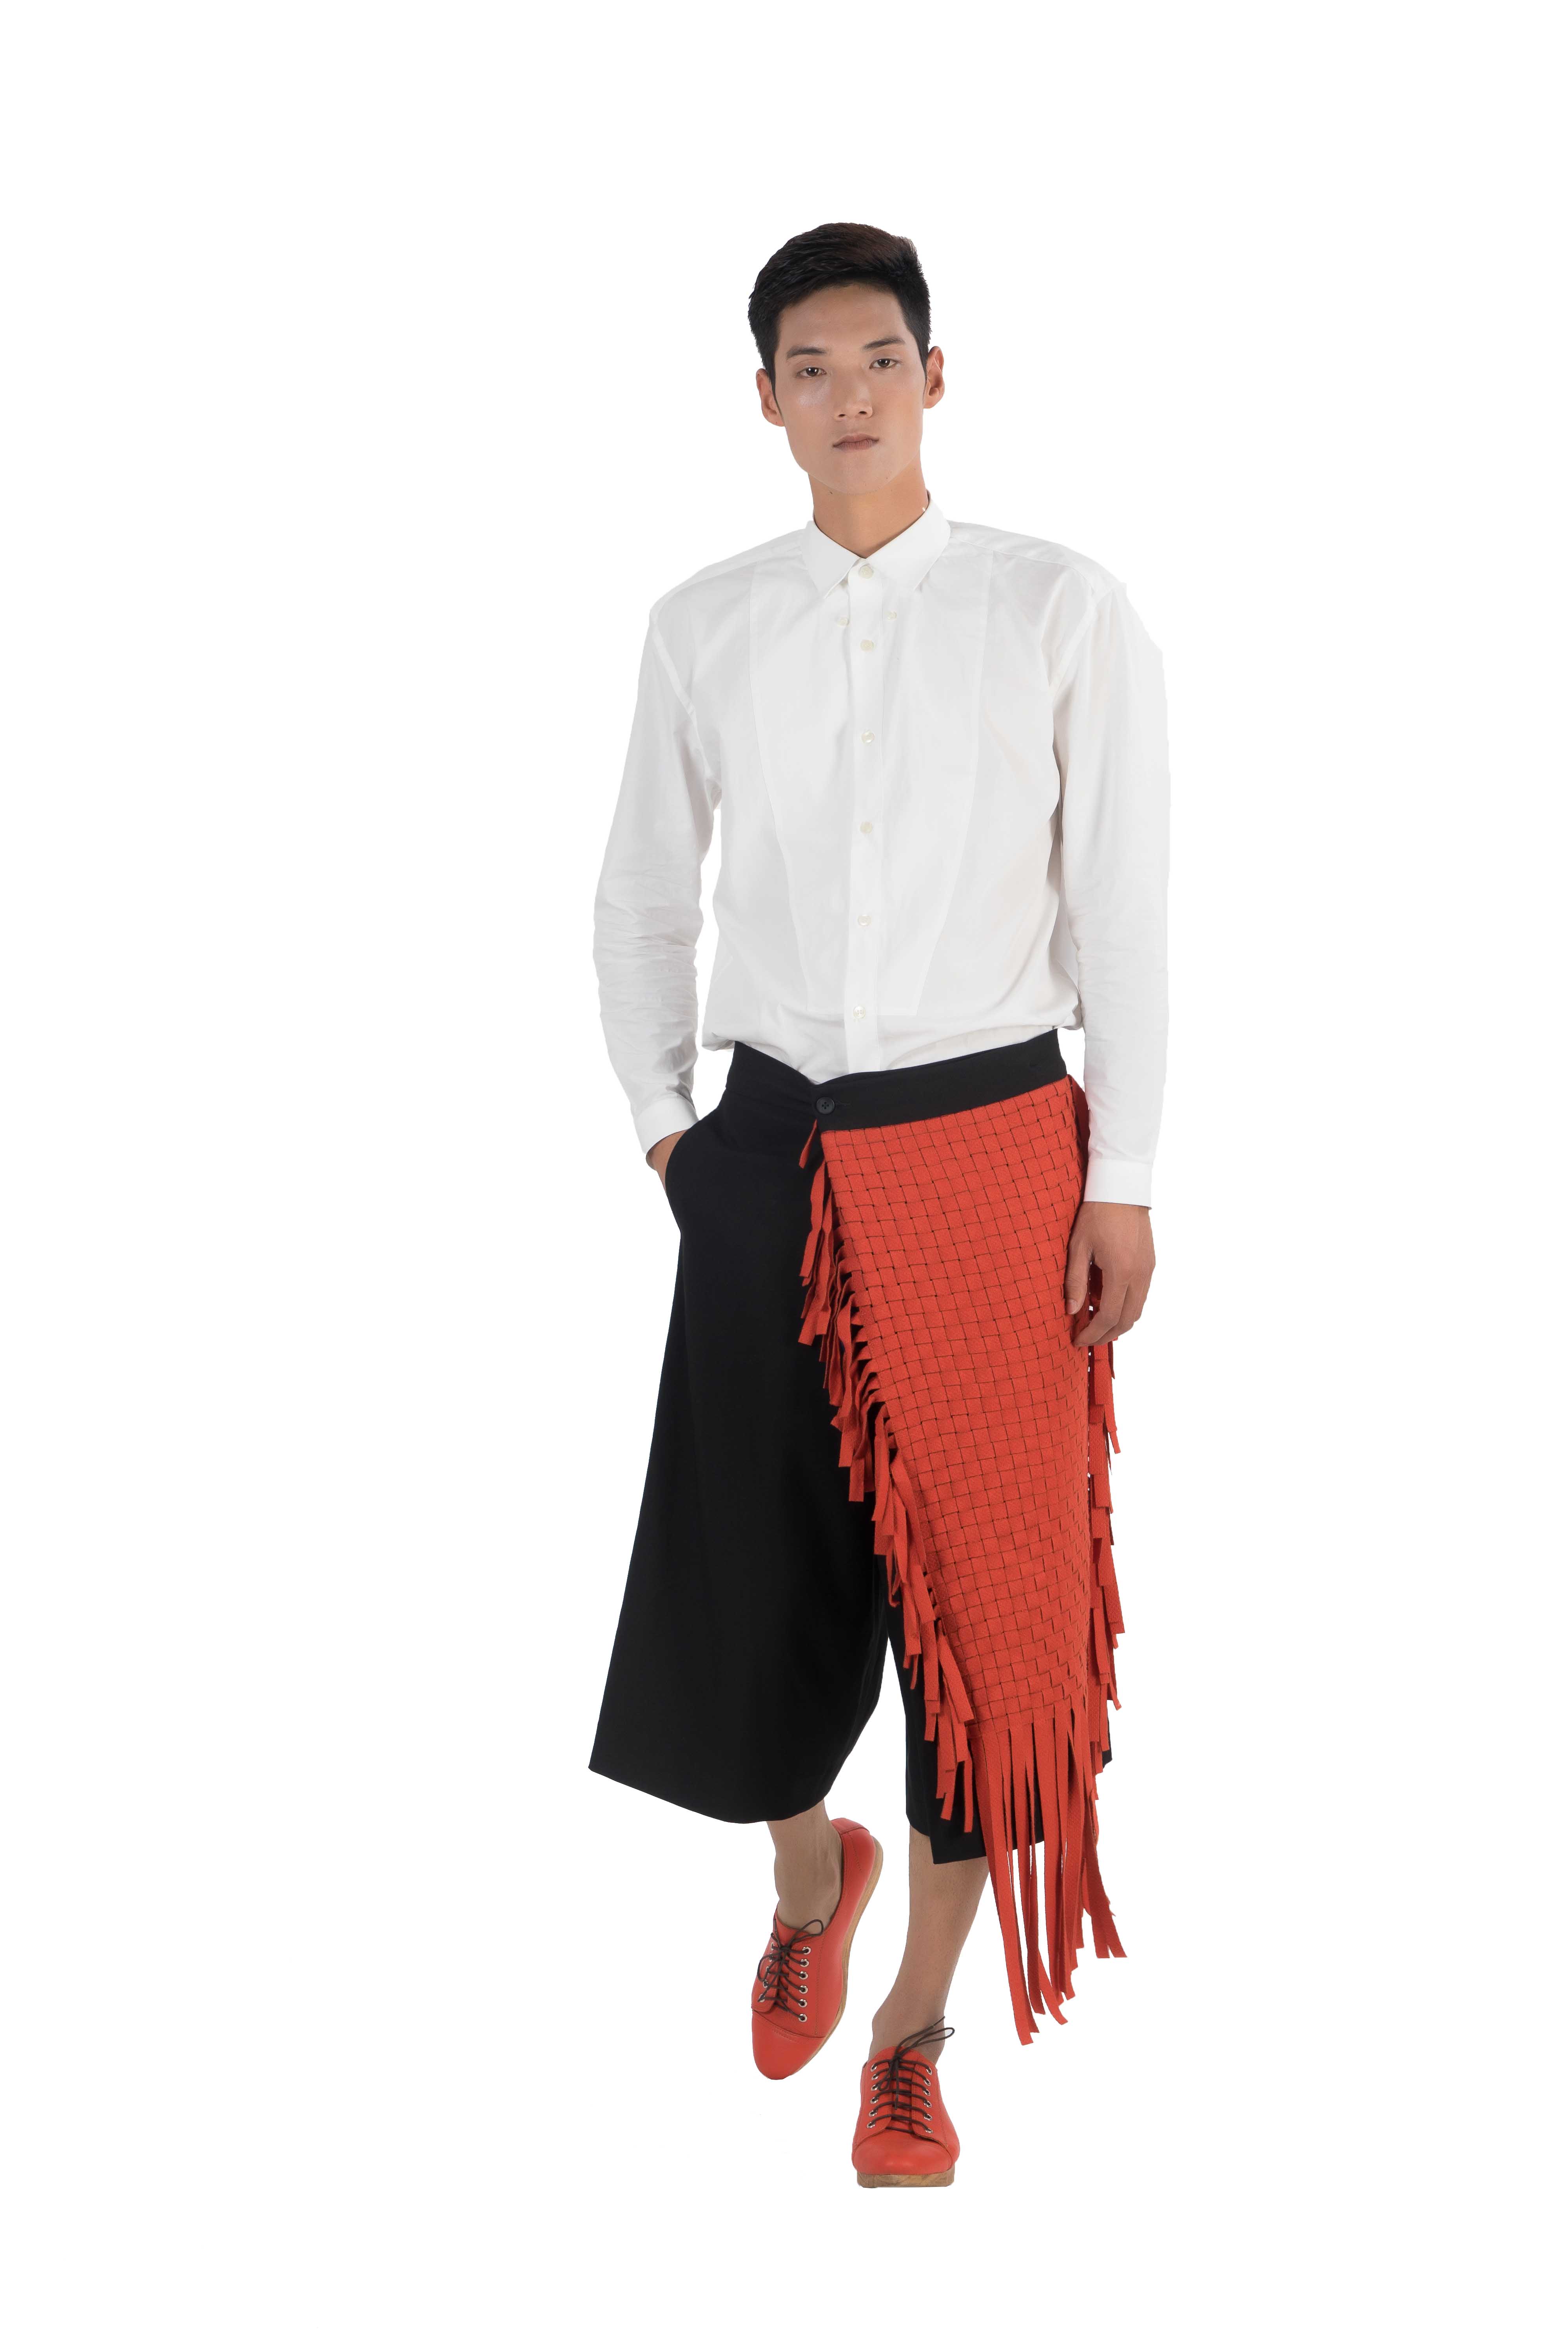 Wrap style knee length wide shorts with orange wool blend woven panel and fringes